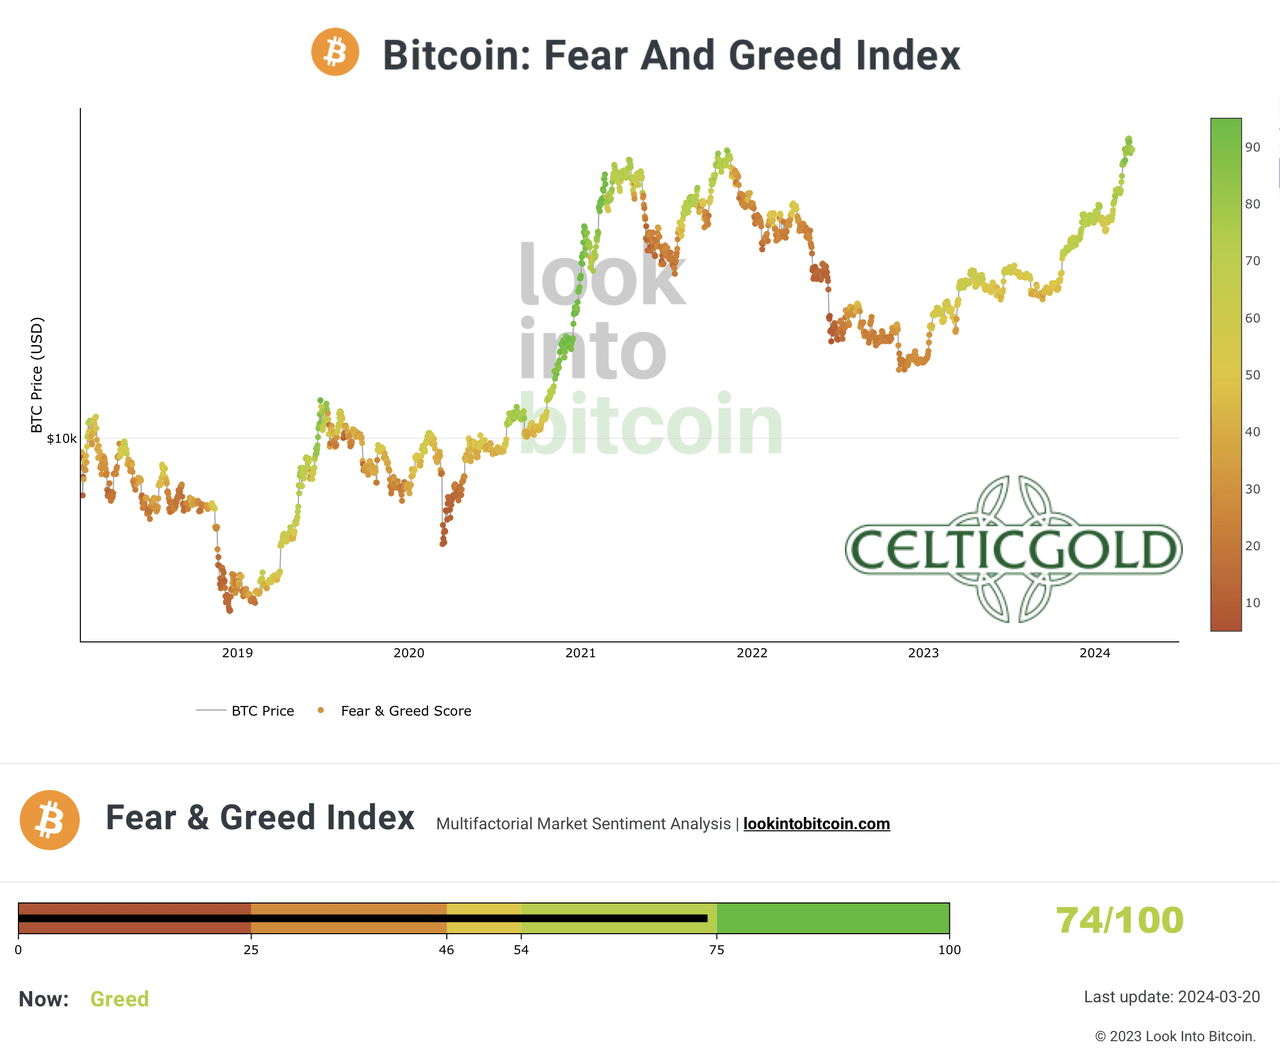 Crypto Fear & Greed Index long term, as of March 20th, 2024. Source: Lookintobitcoin